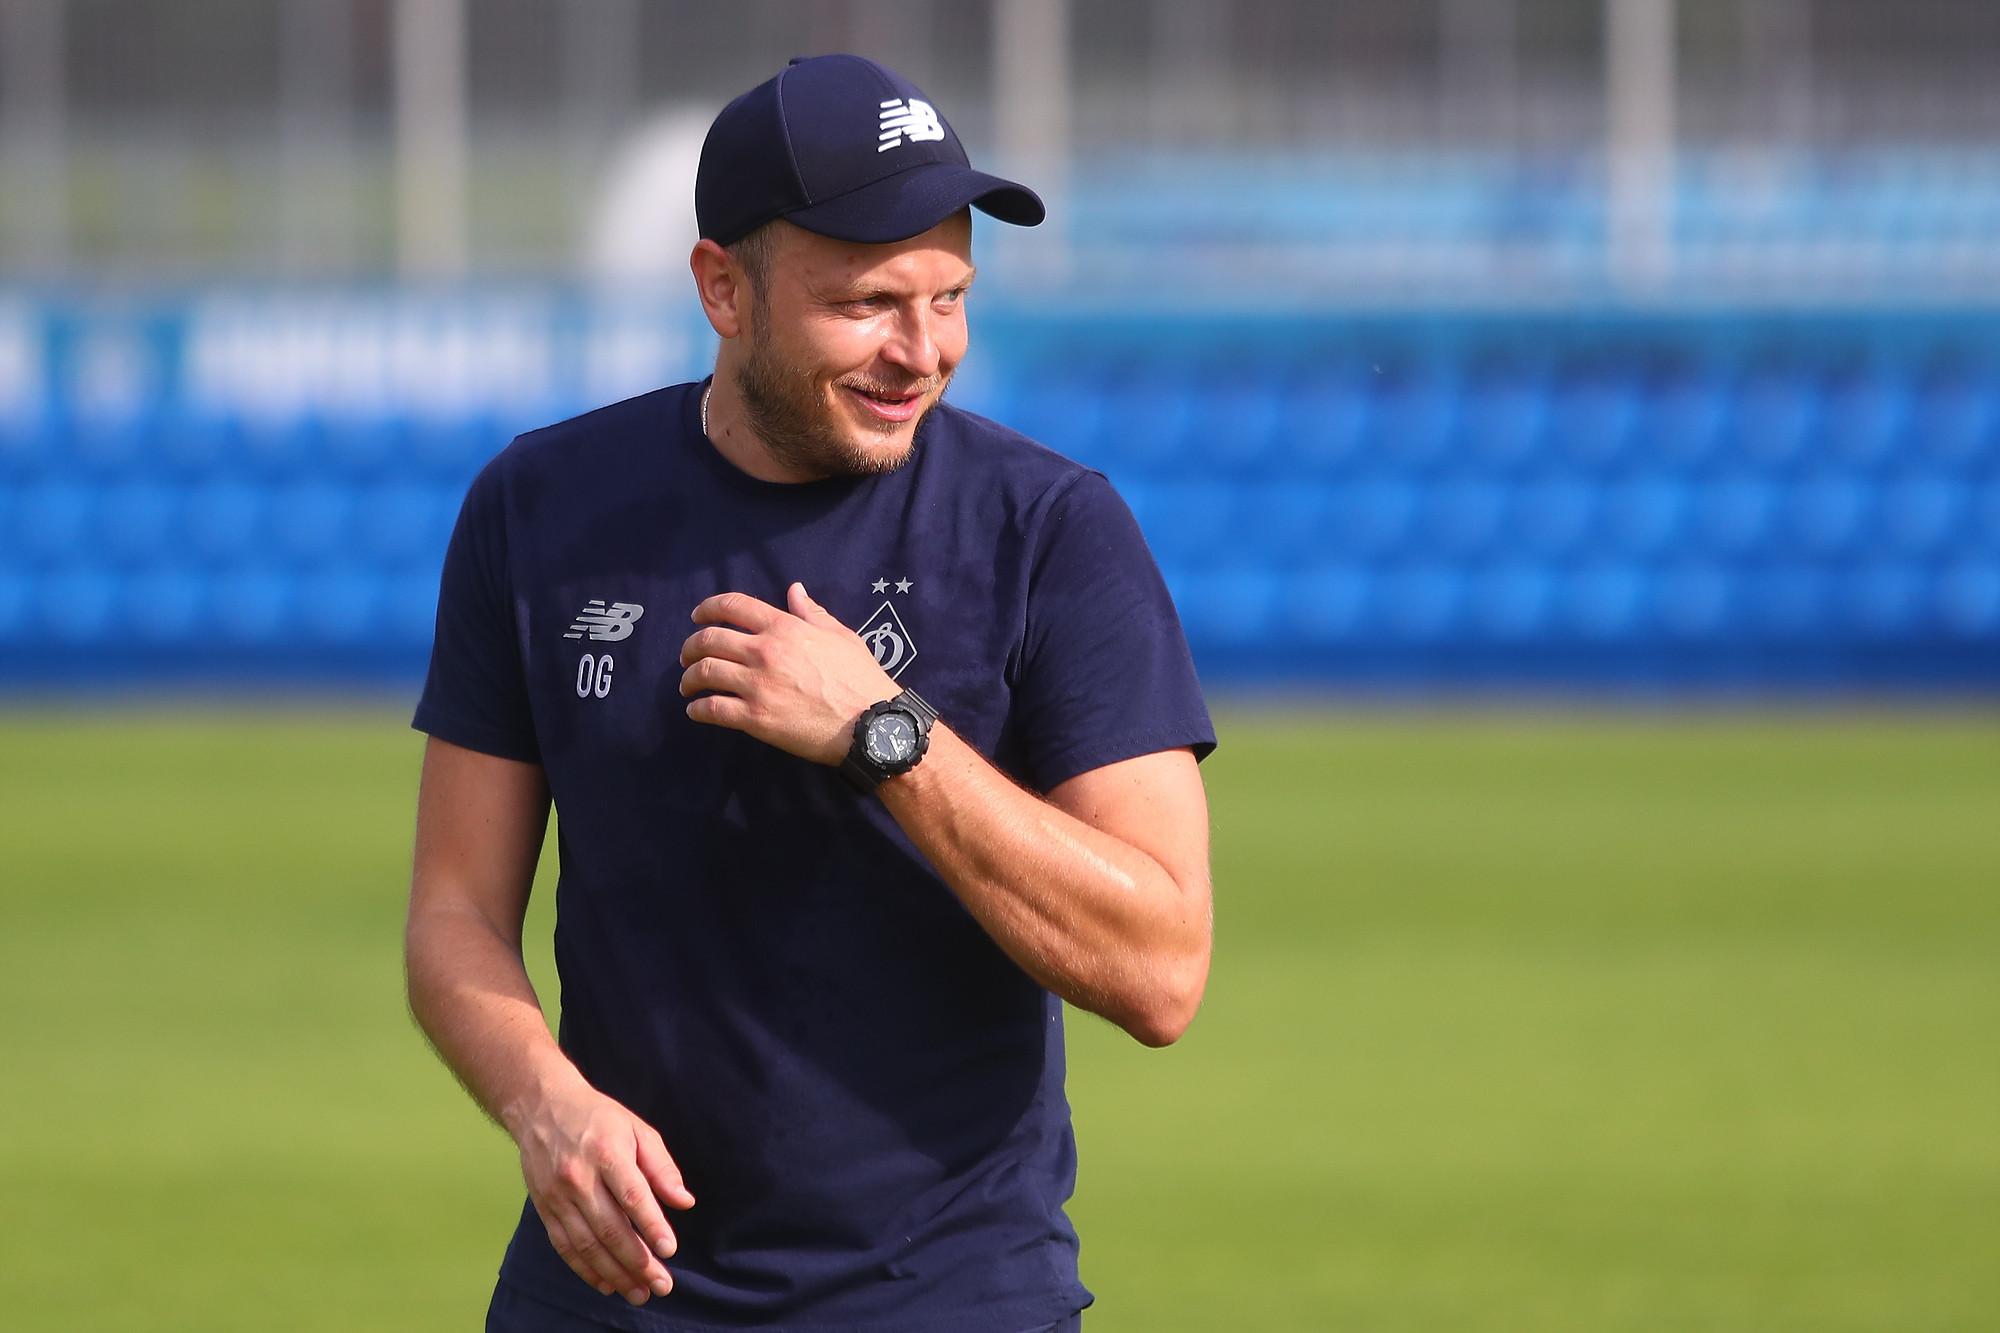 Oleh Husiev: “Guys must be 70 per cent ready by Lucescu’s return”